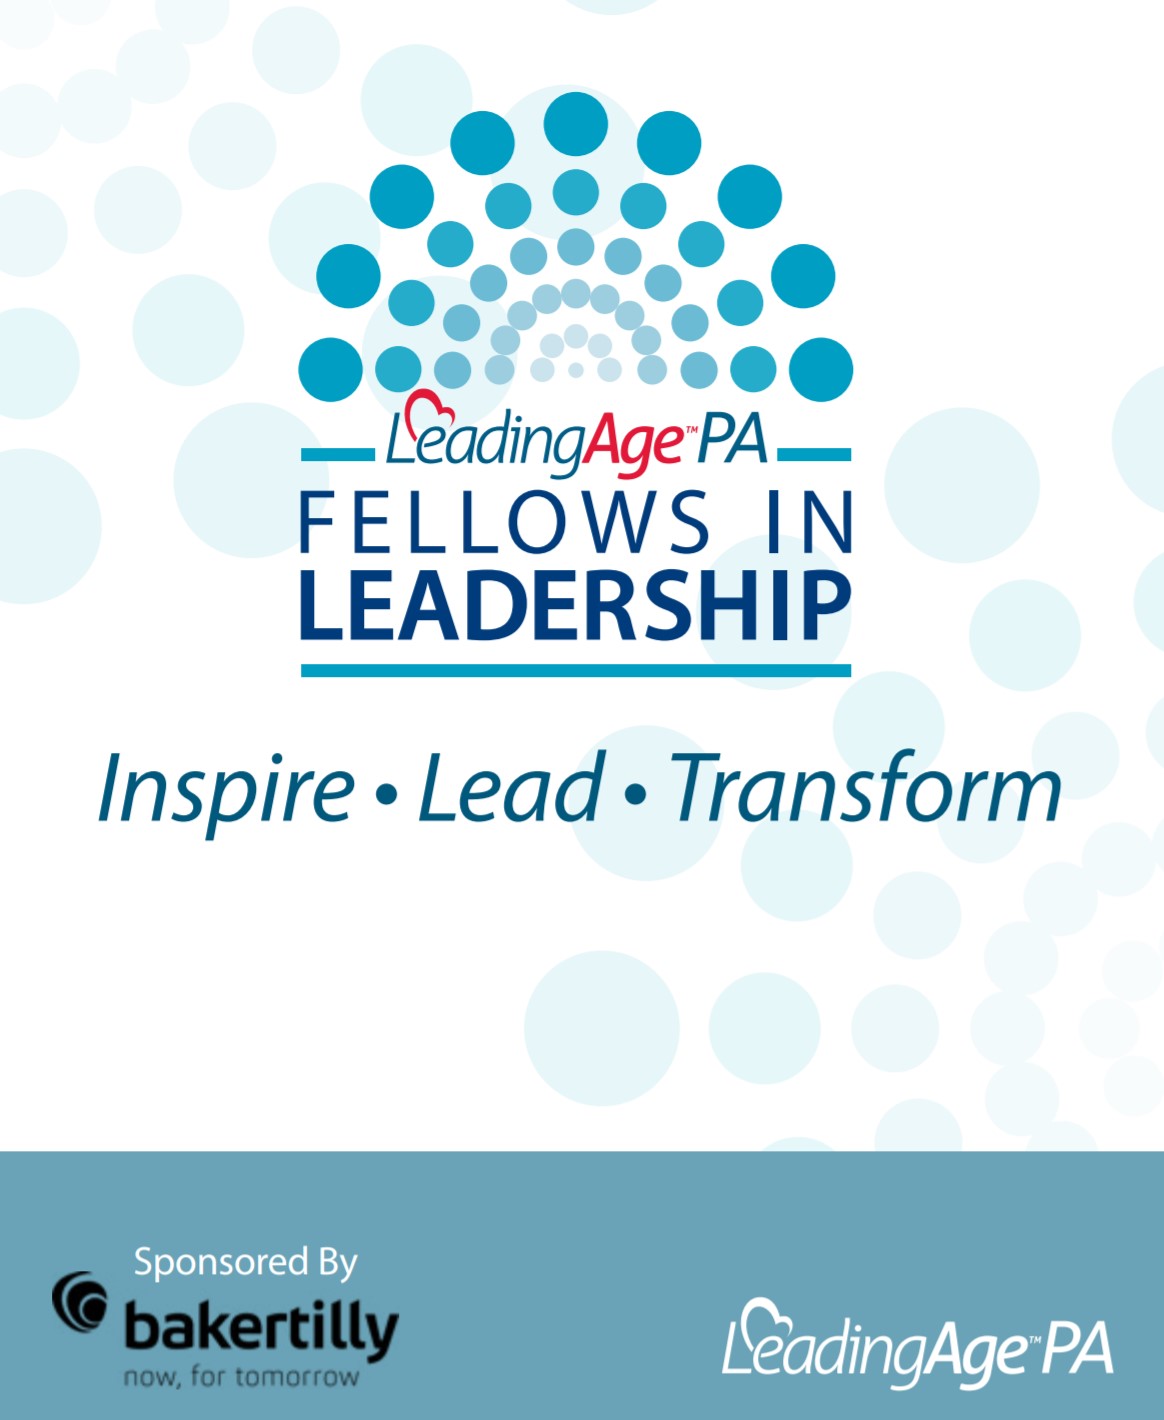 Cover of Fellows in Leadership brochure and application image